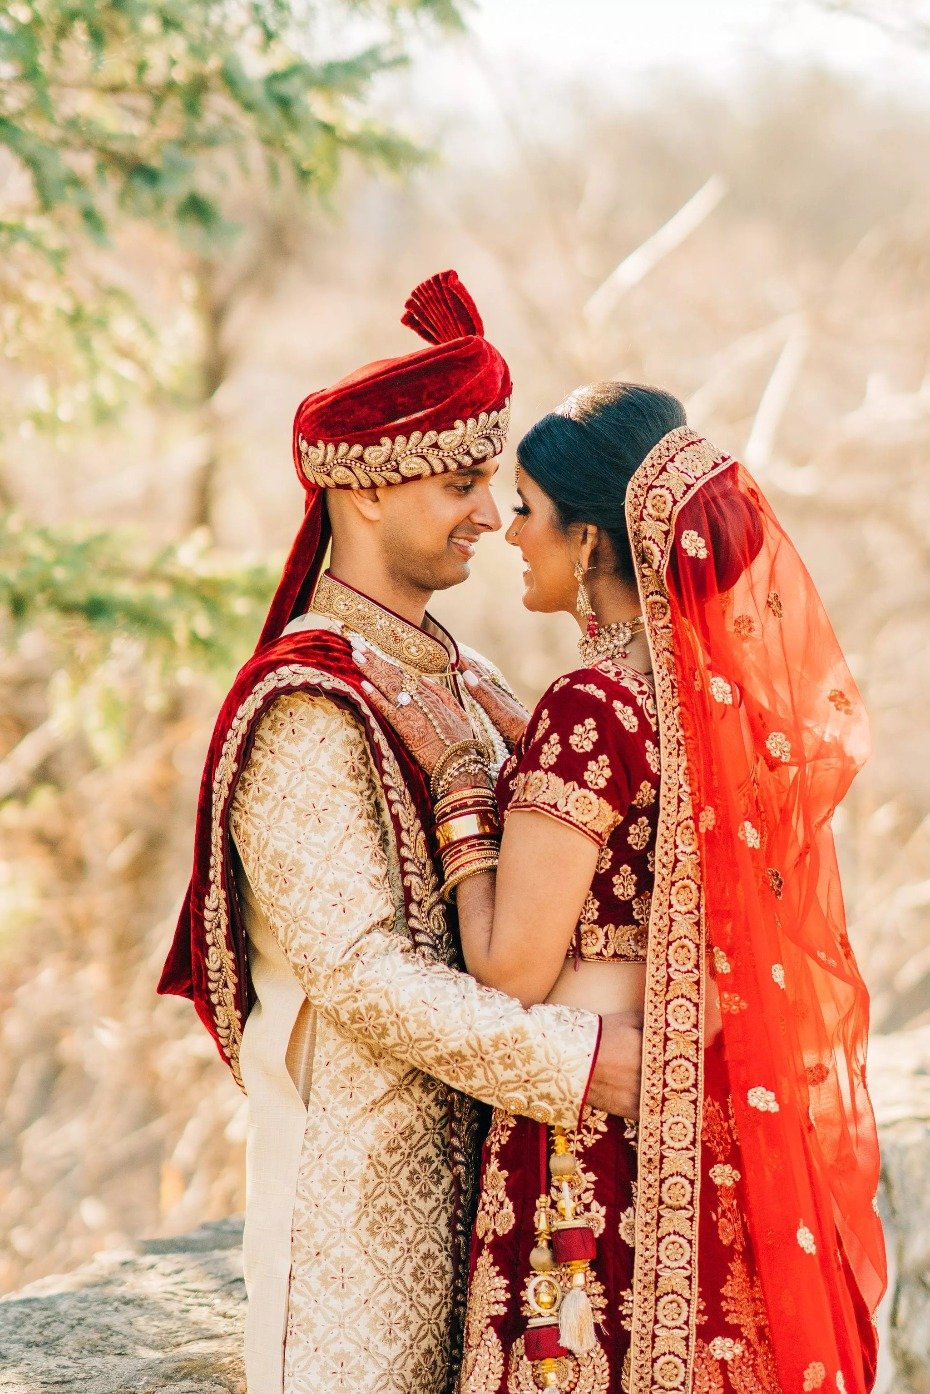 Indian Wedding bride and groom photography ideas